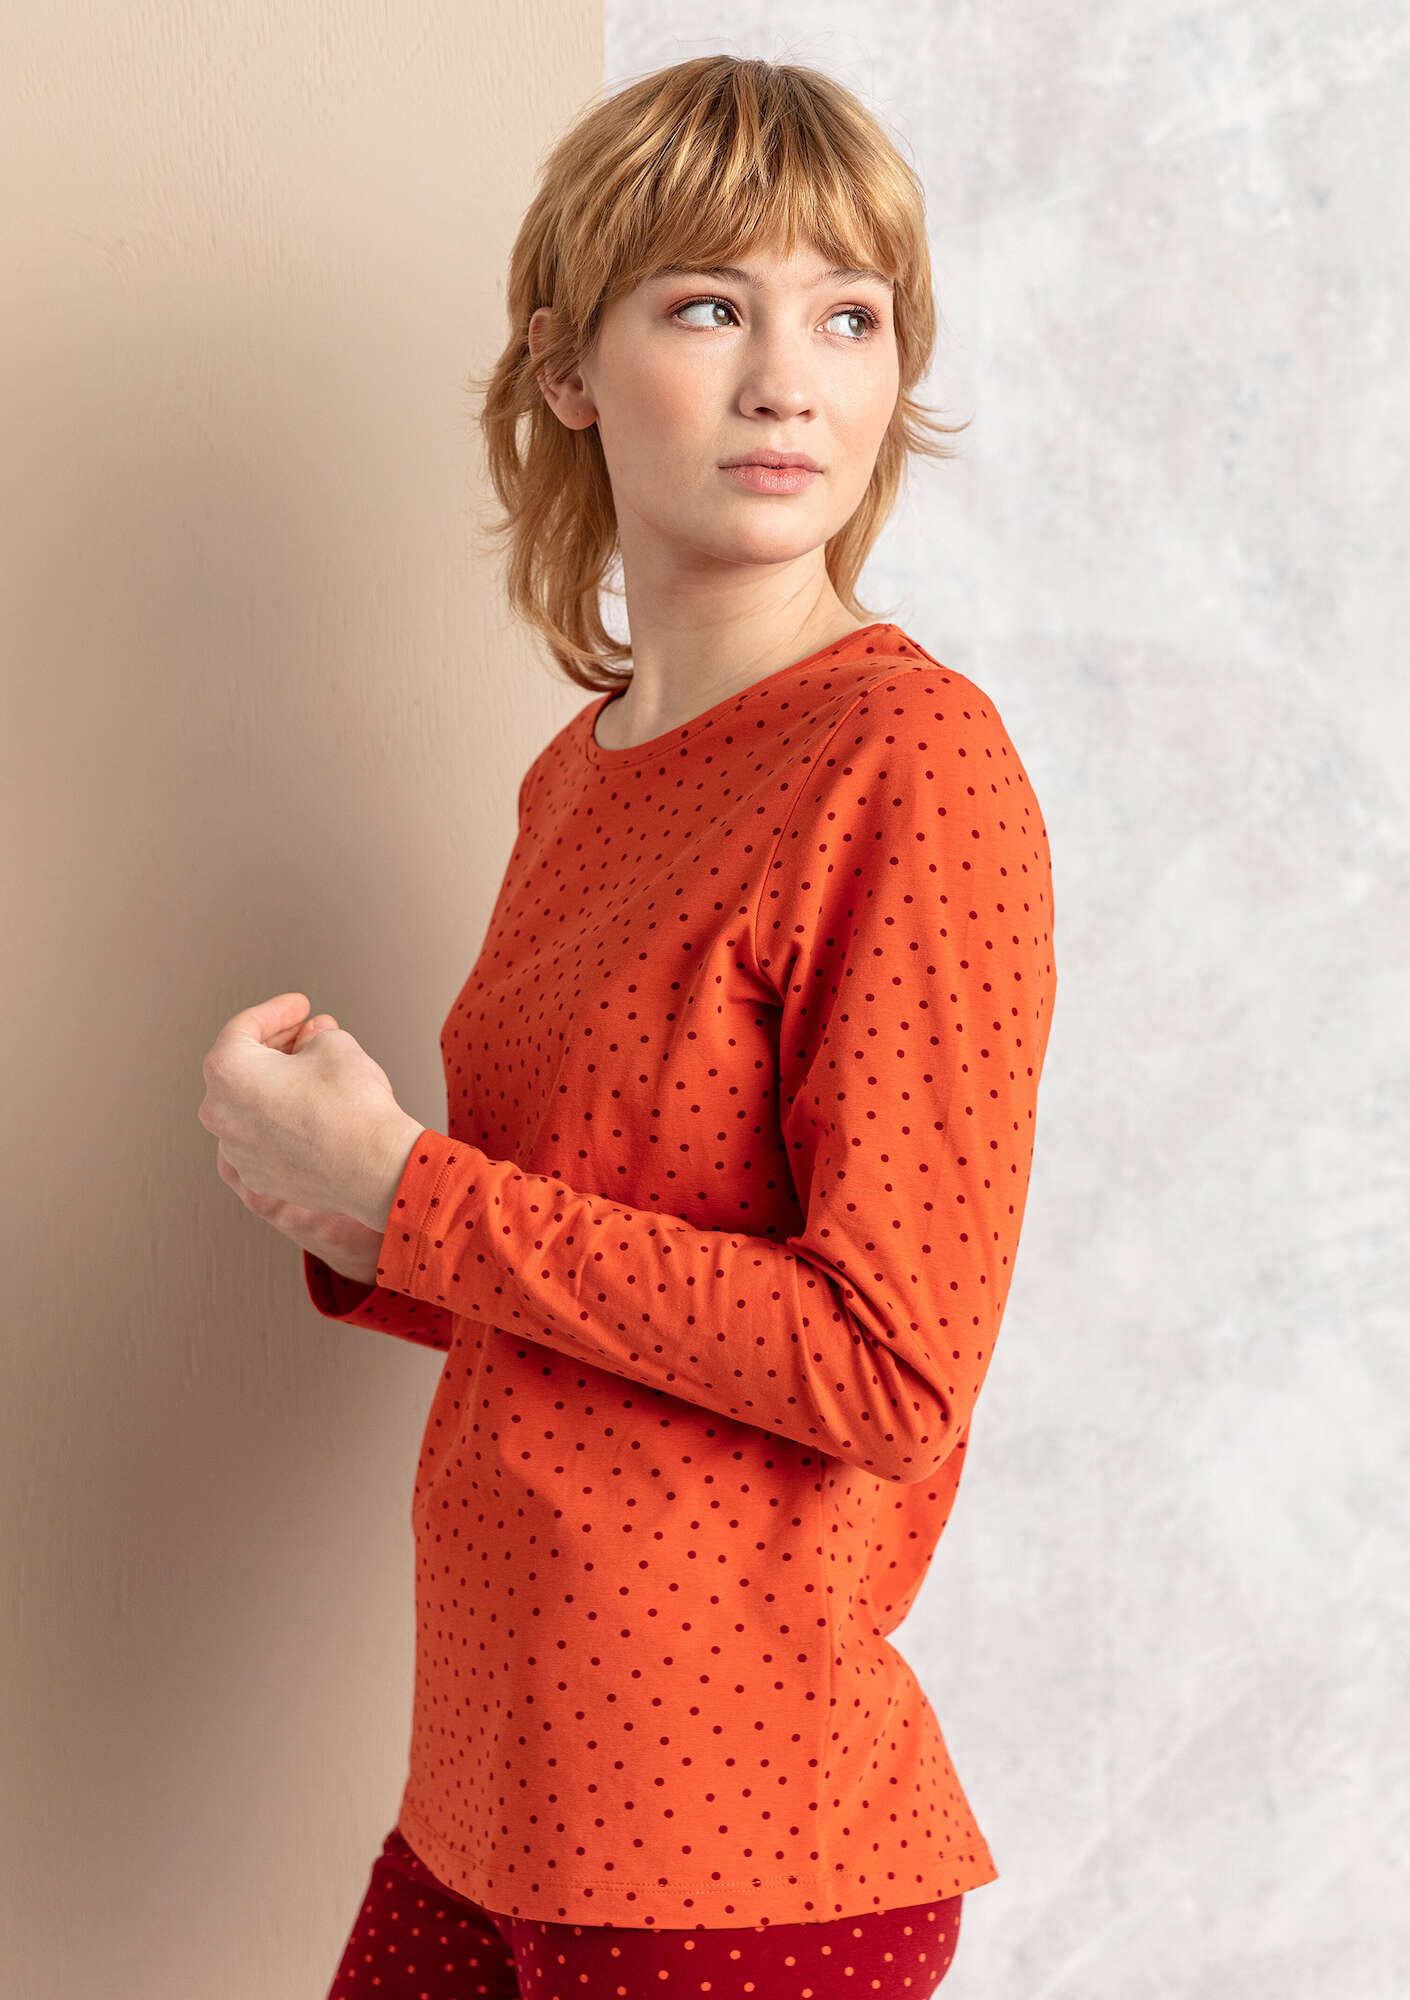 “Pytte” jersey top in organic cotton/spandex chili/patterned